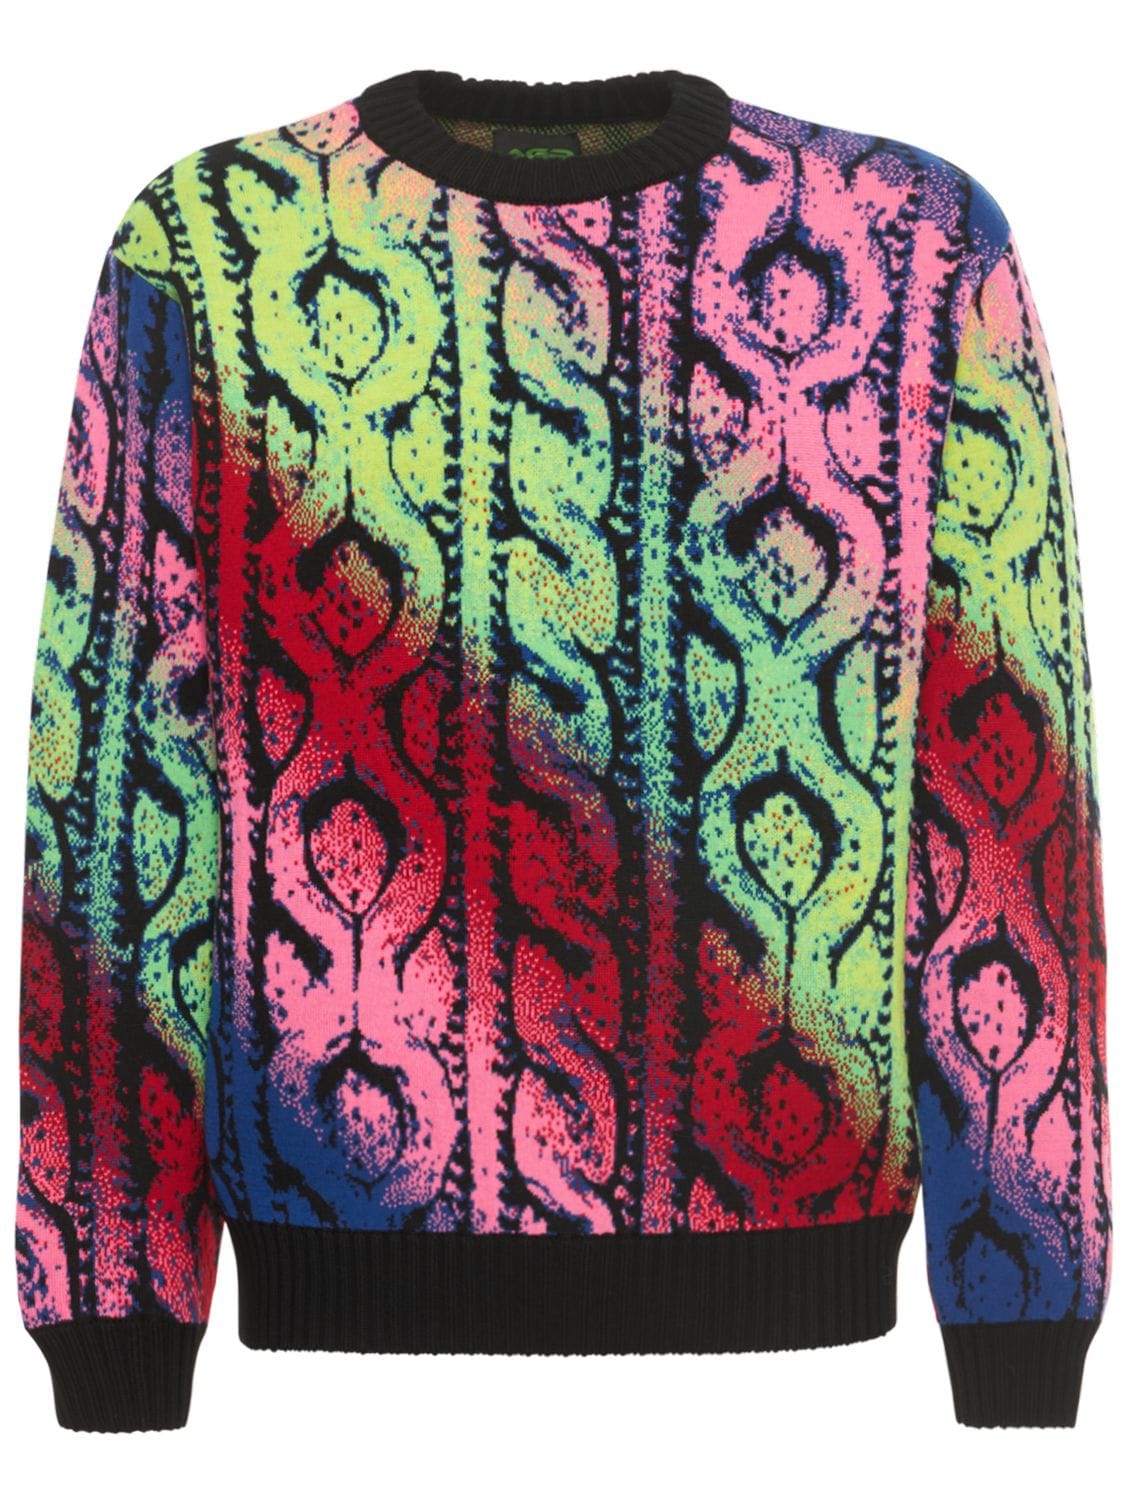 AGR CABLE JACQUARD WOOL KNIT SWEATER